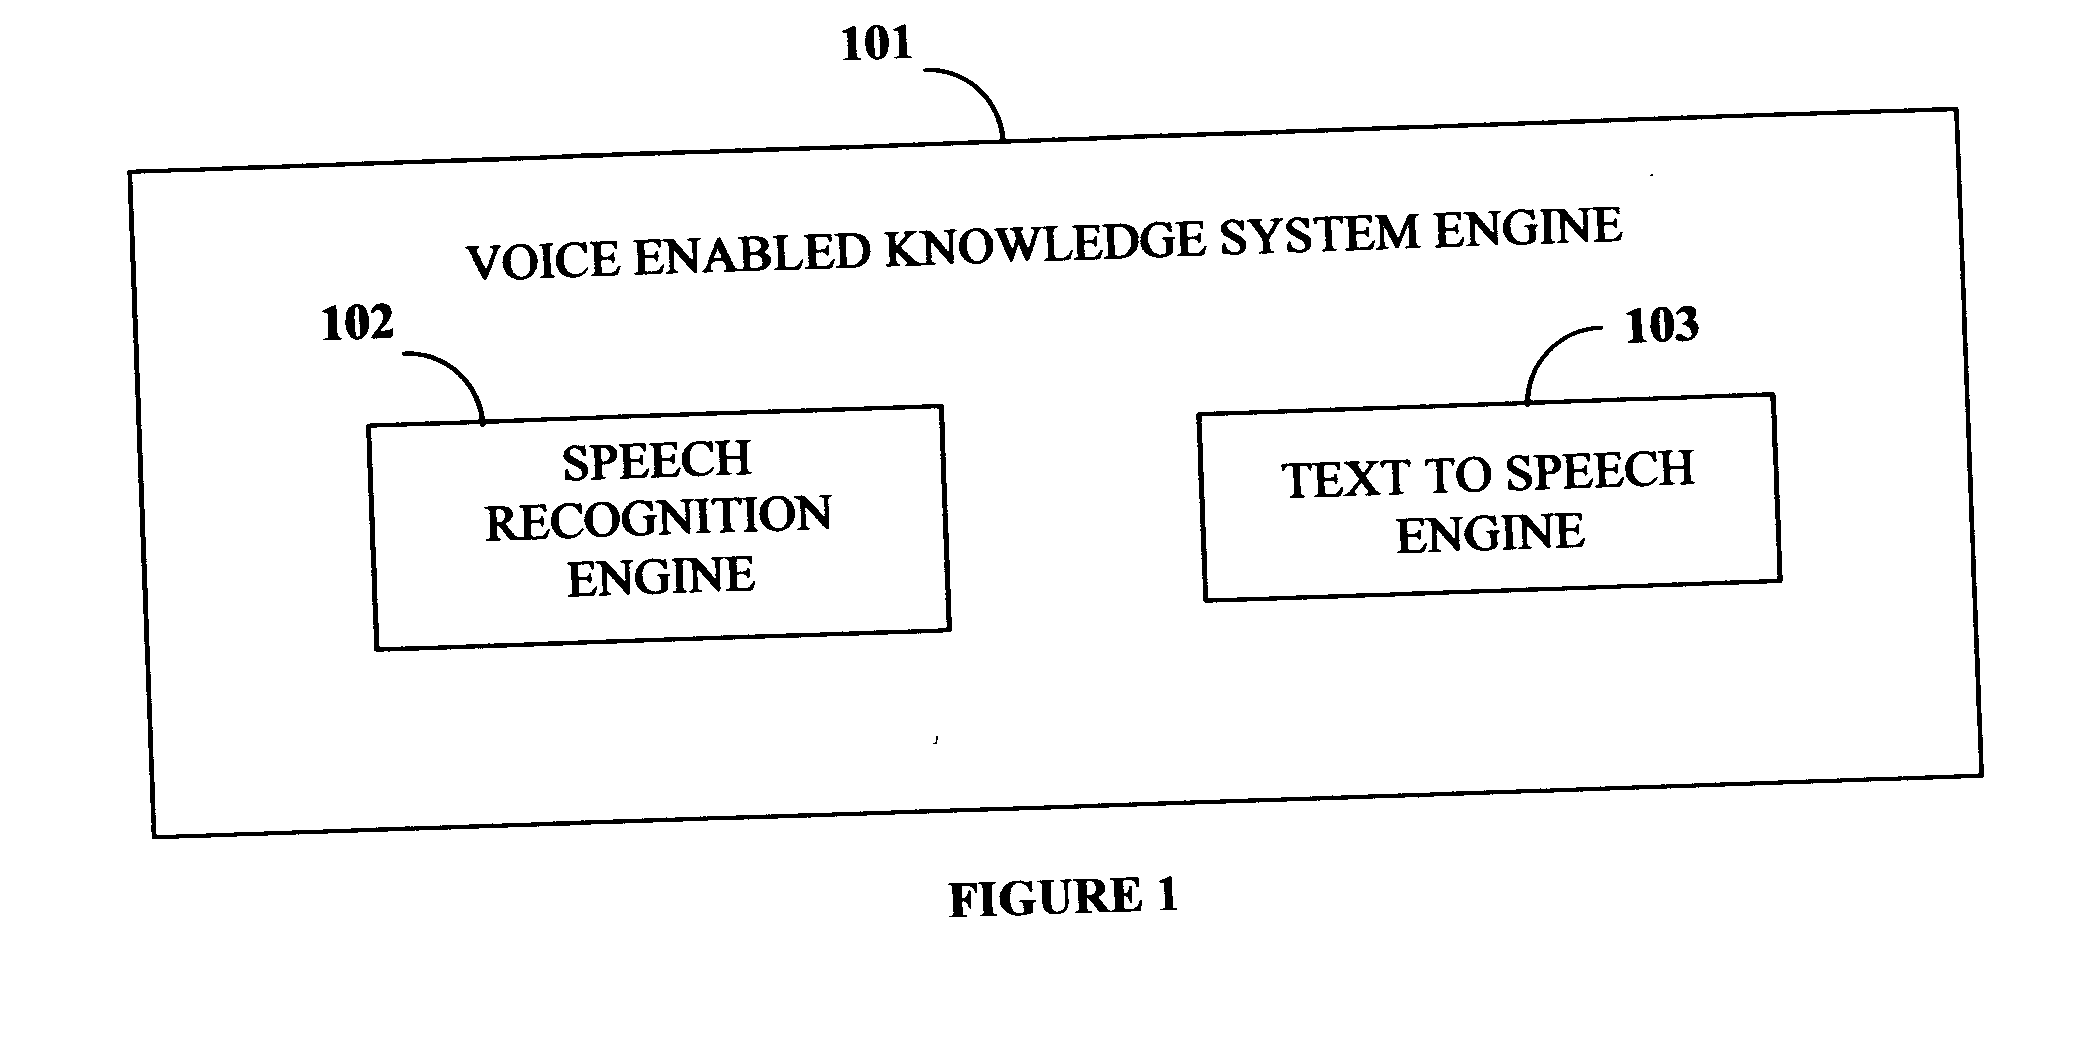 Voice enabled knowledge system